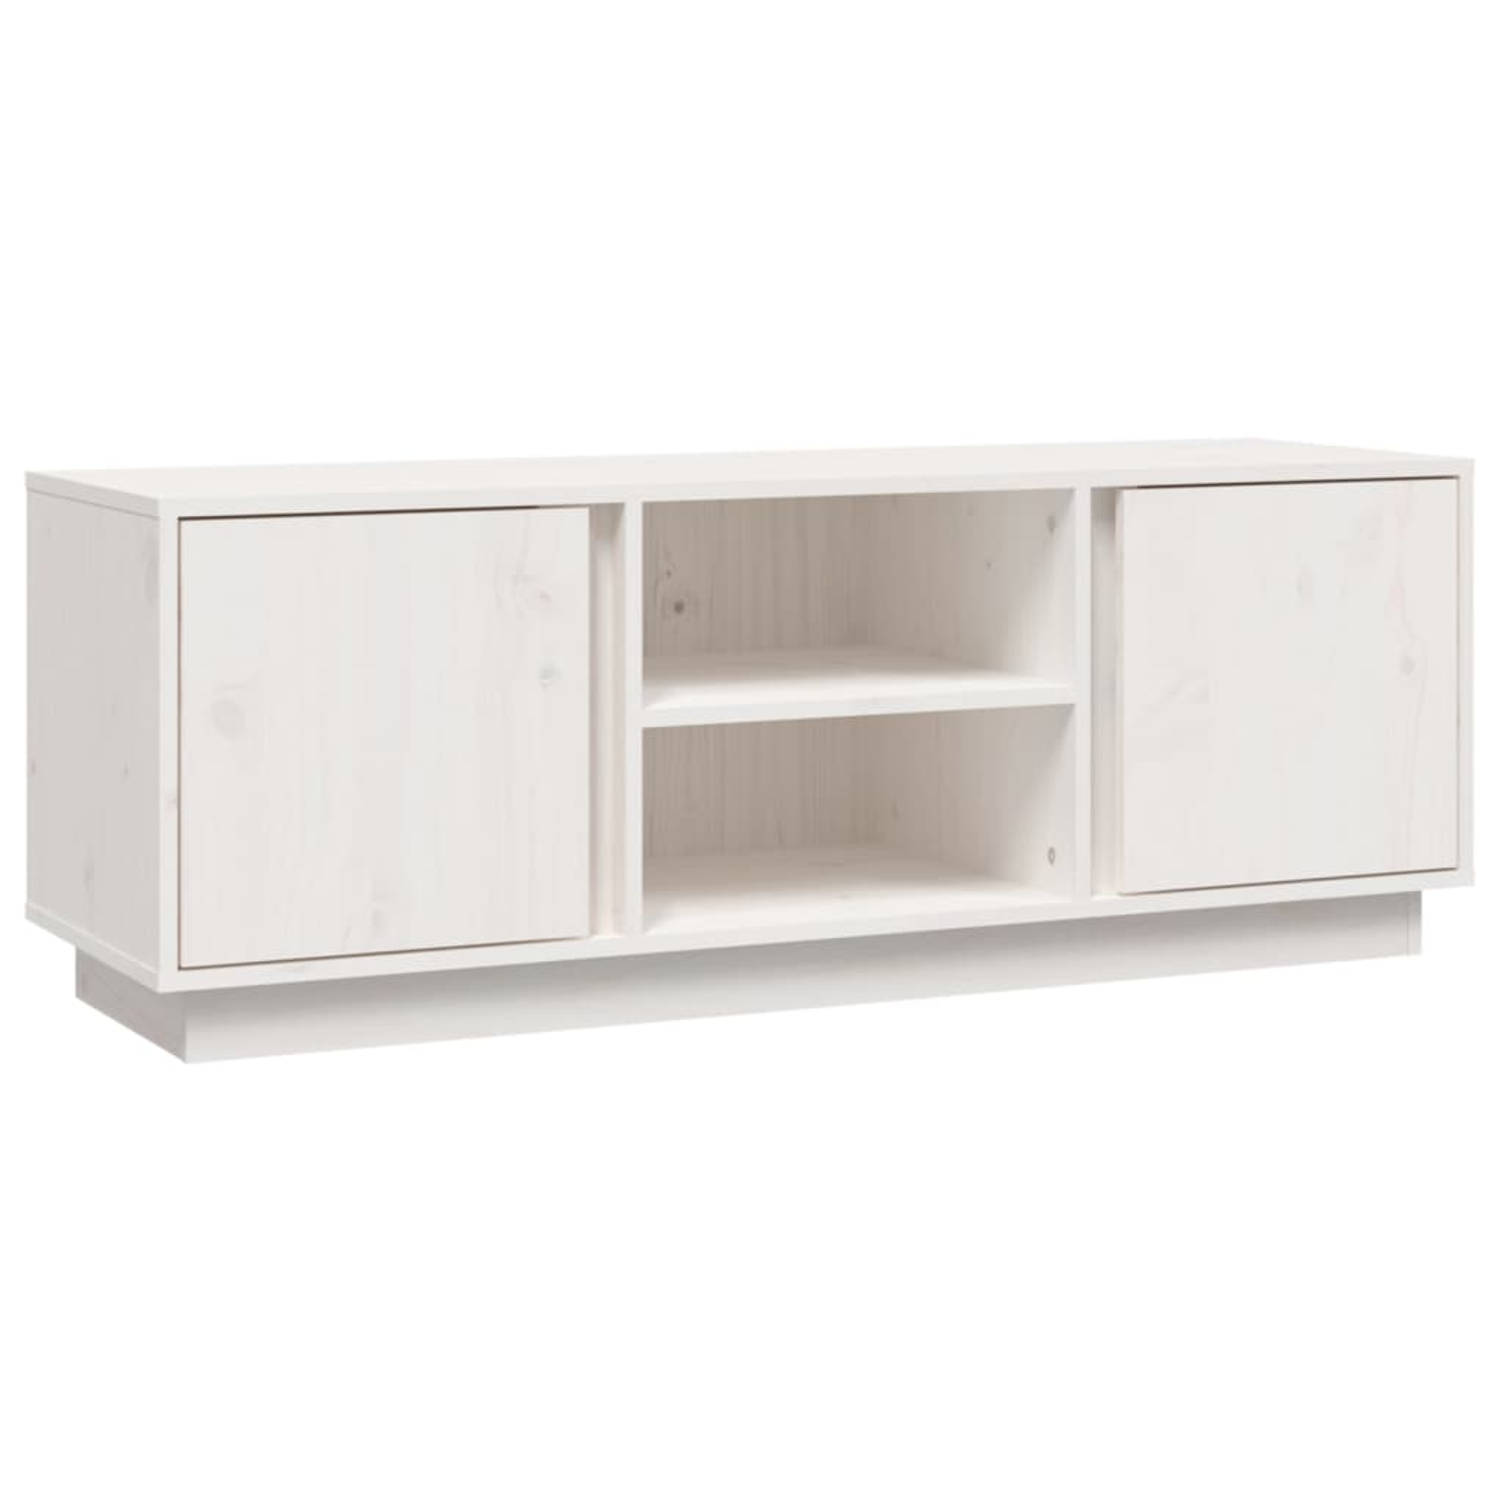 The Living Store TV-meubel Massief Grenenhout - 110 x 35 x 40.5 cm - Wit